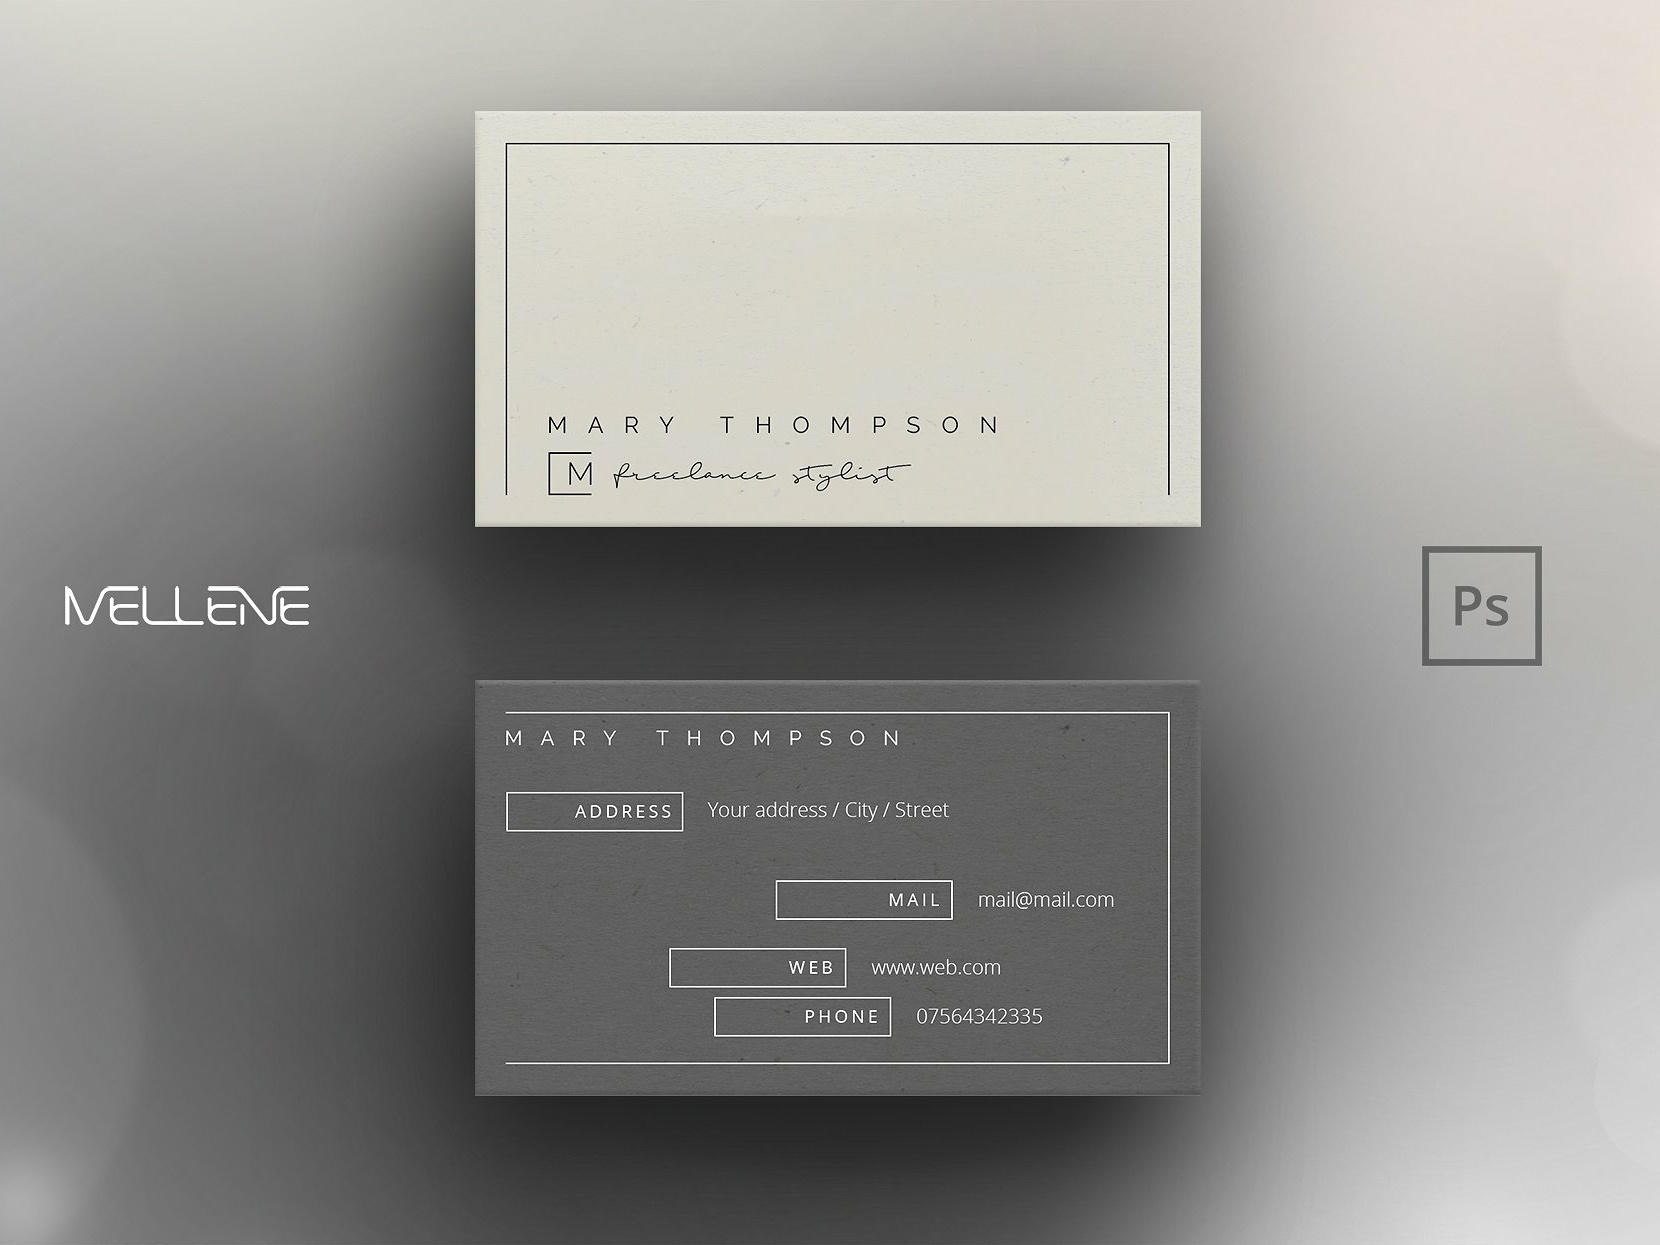 Business Card Template For Photoshopbusiness Cards On In Name Card Template Photoshop